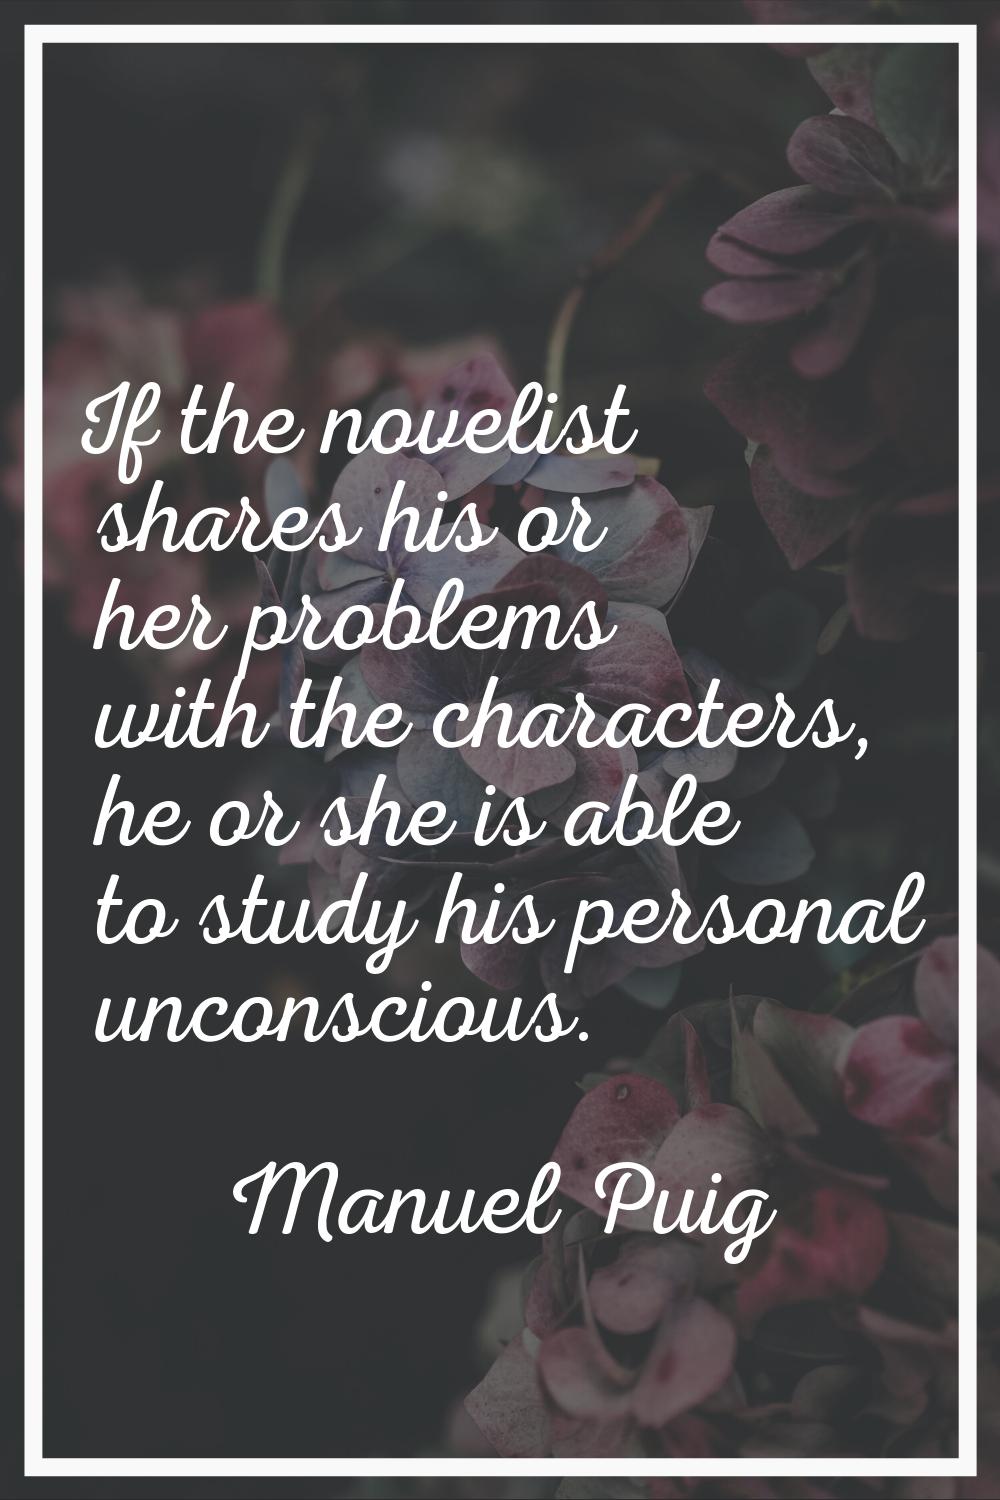 If the novelist shares his or her problems with the characters, he or she is able to study his pers